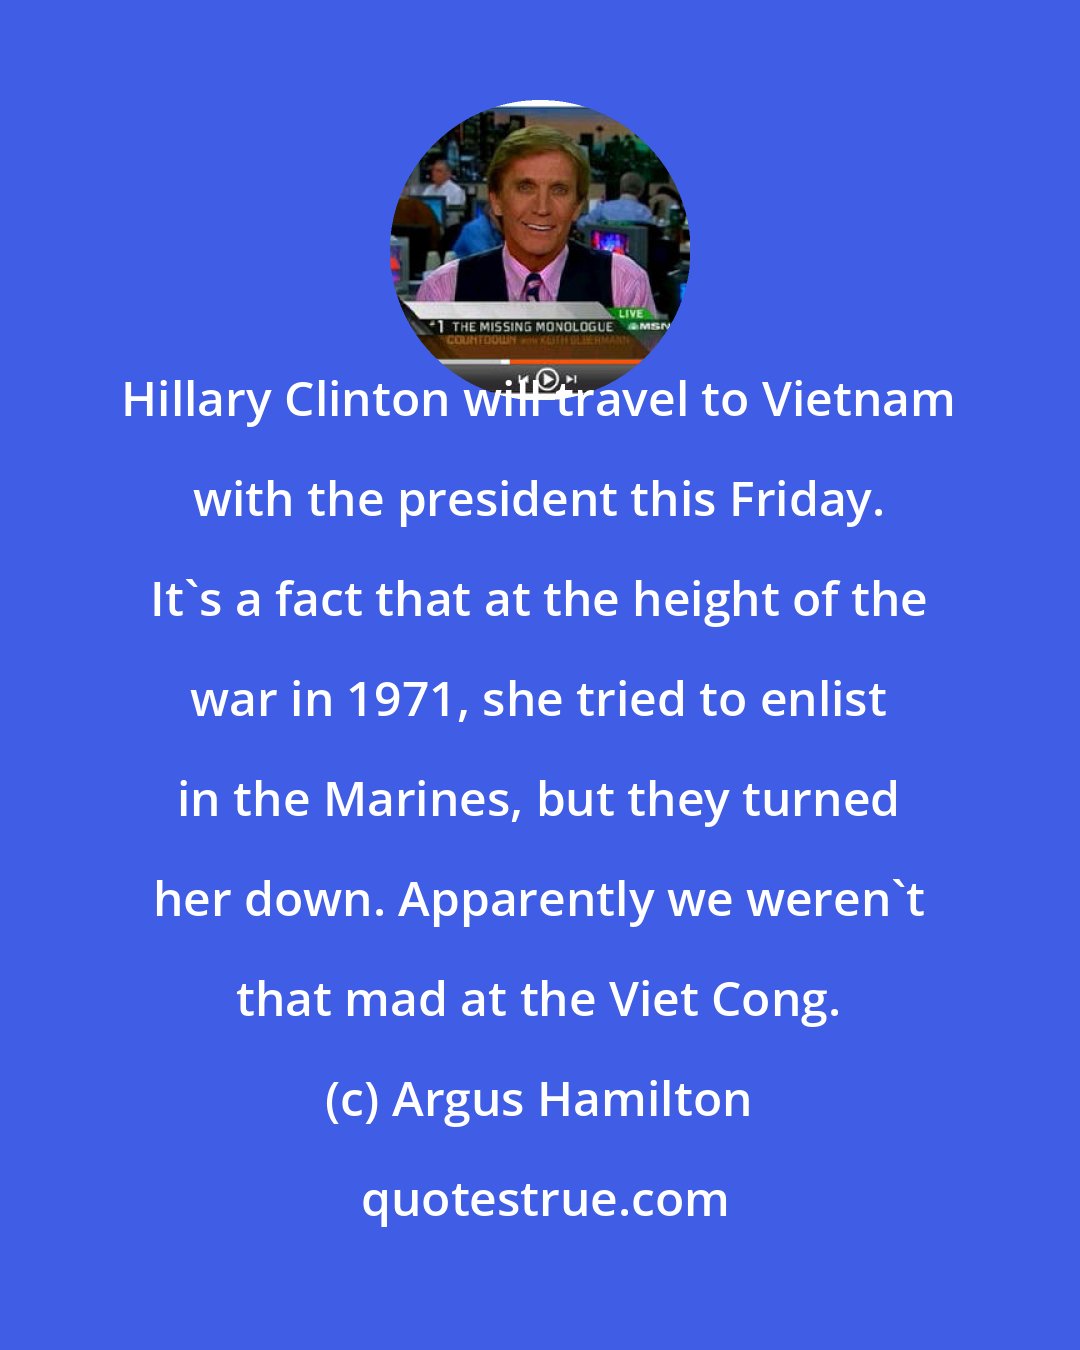 Argus Hamilton: Hillary Clinton will travel to Vietnam with the president this Friday. It's a fact that at the height of the war in 1971, she tried to enlist in the Marines, but they turned her down. Apparently we weren't that mad at the Viet Cong.